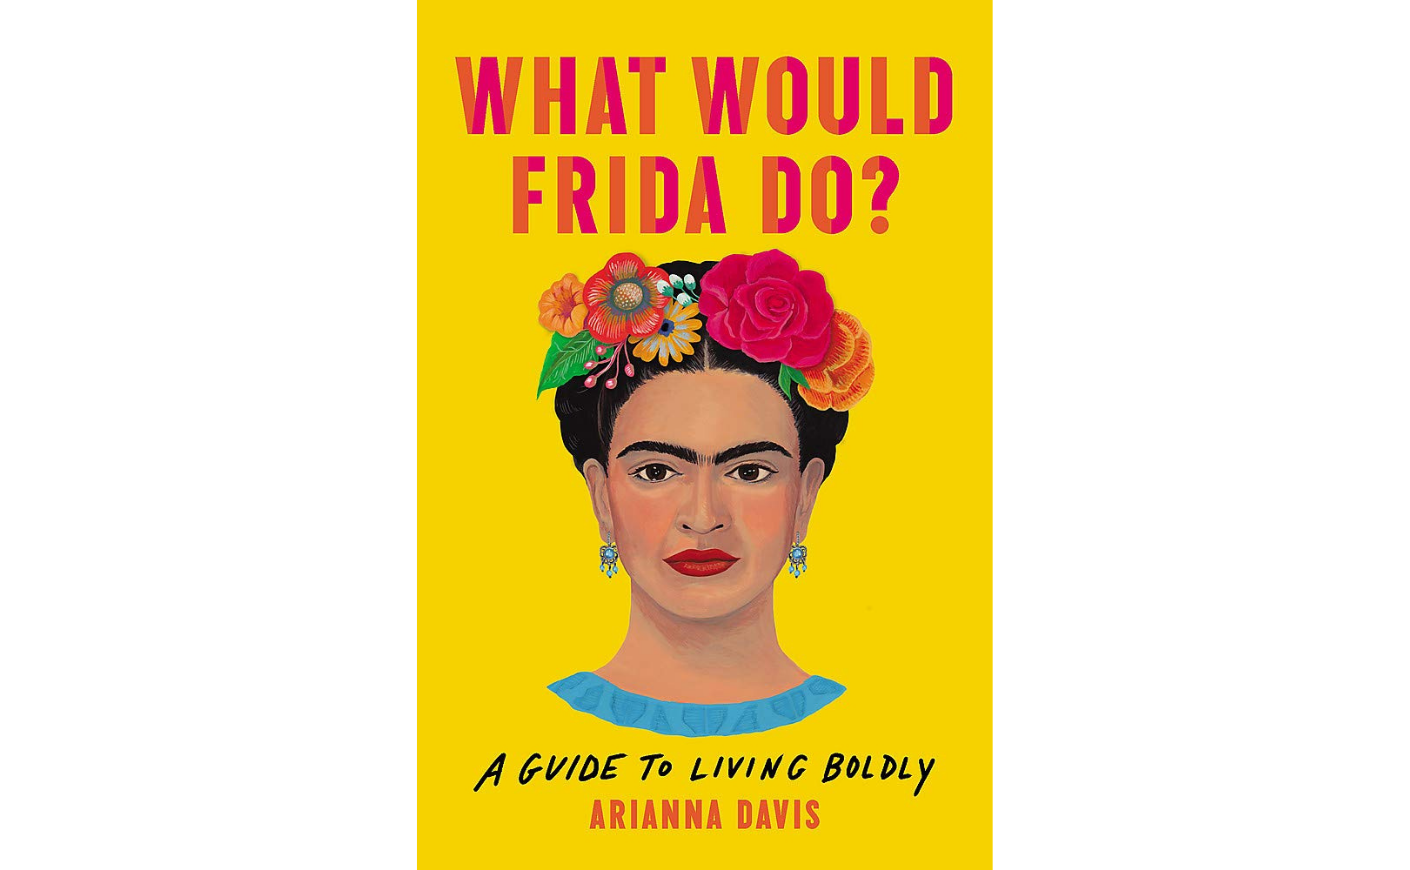 what would frida do?